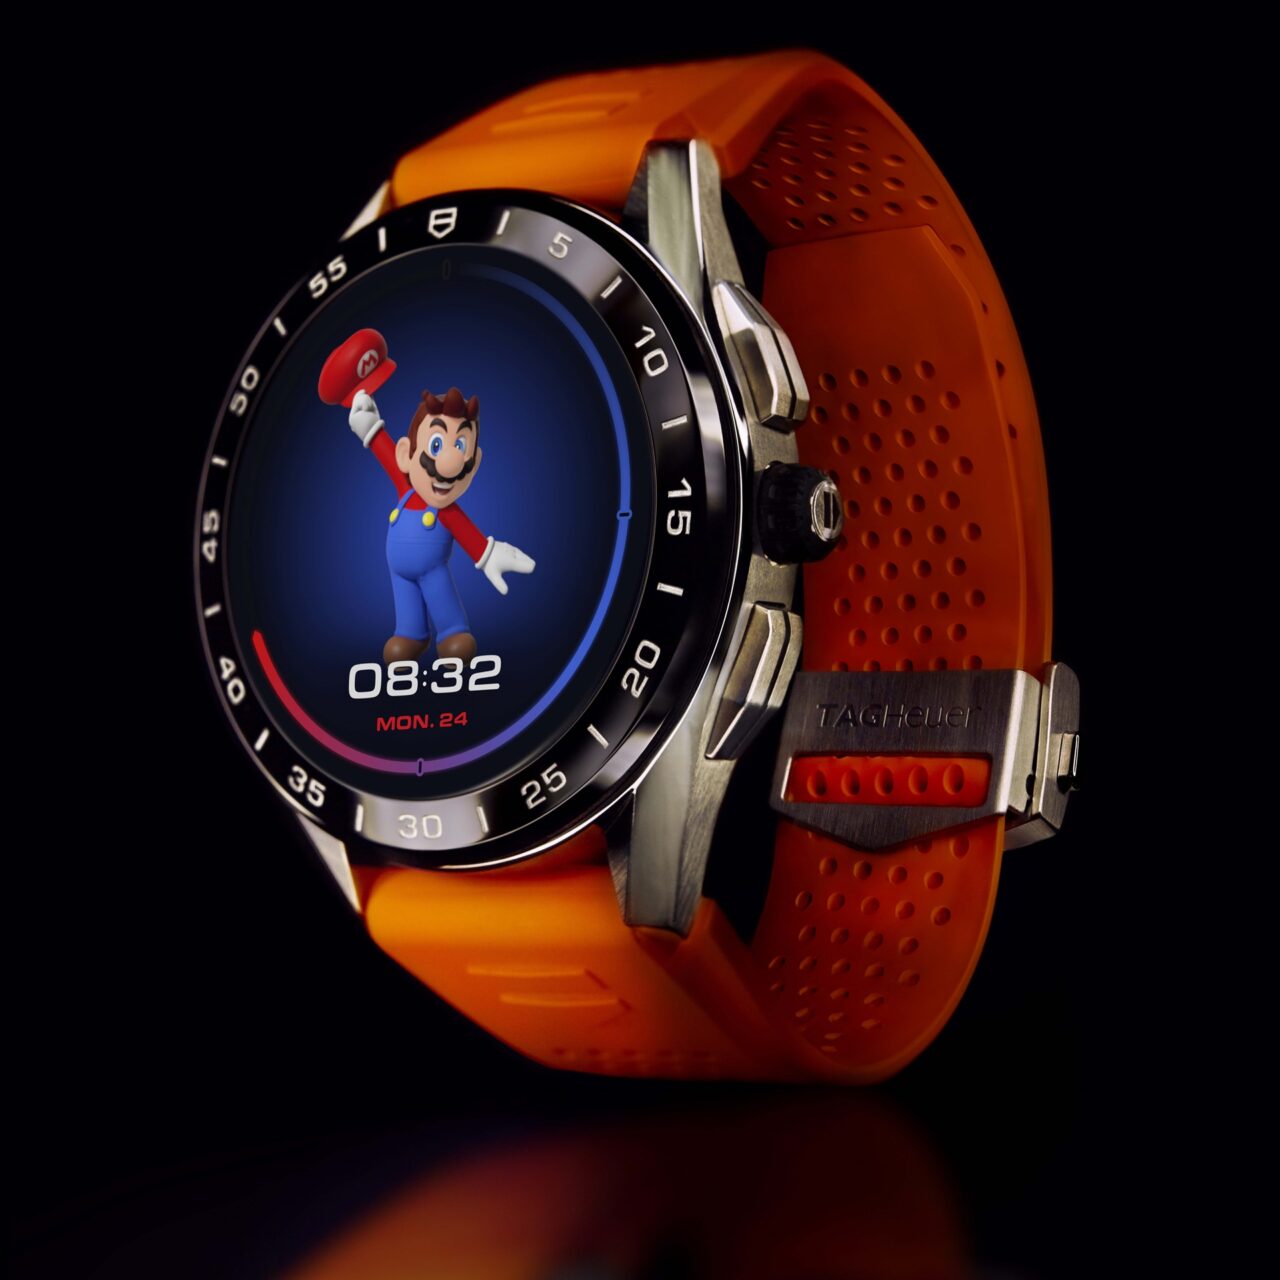 Here’s Tag Heuer’s 2,150 Super Mario watch VGC